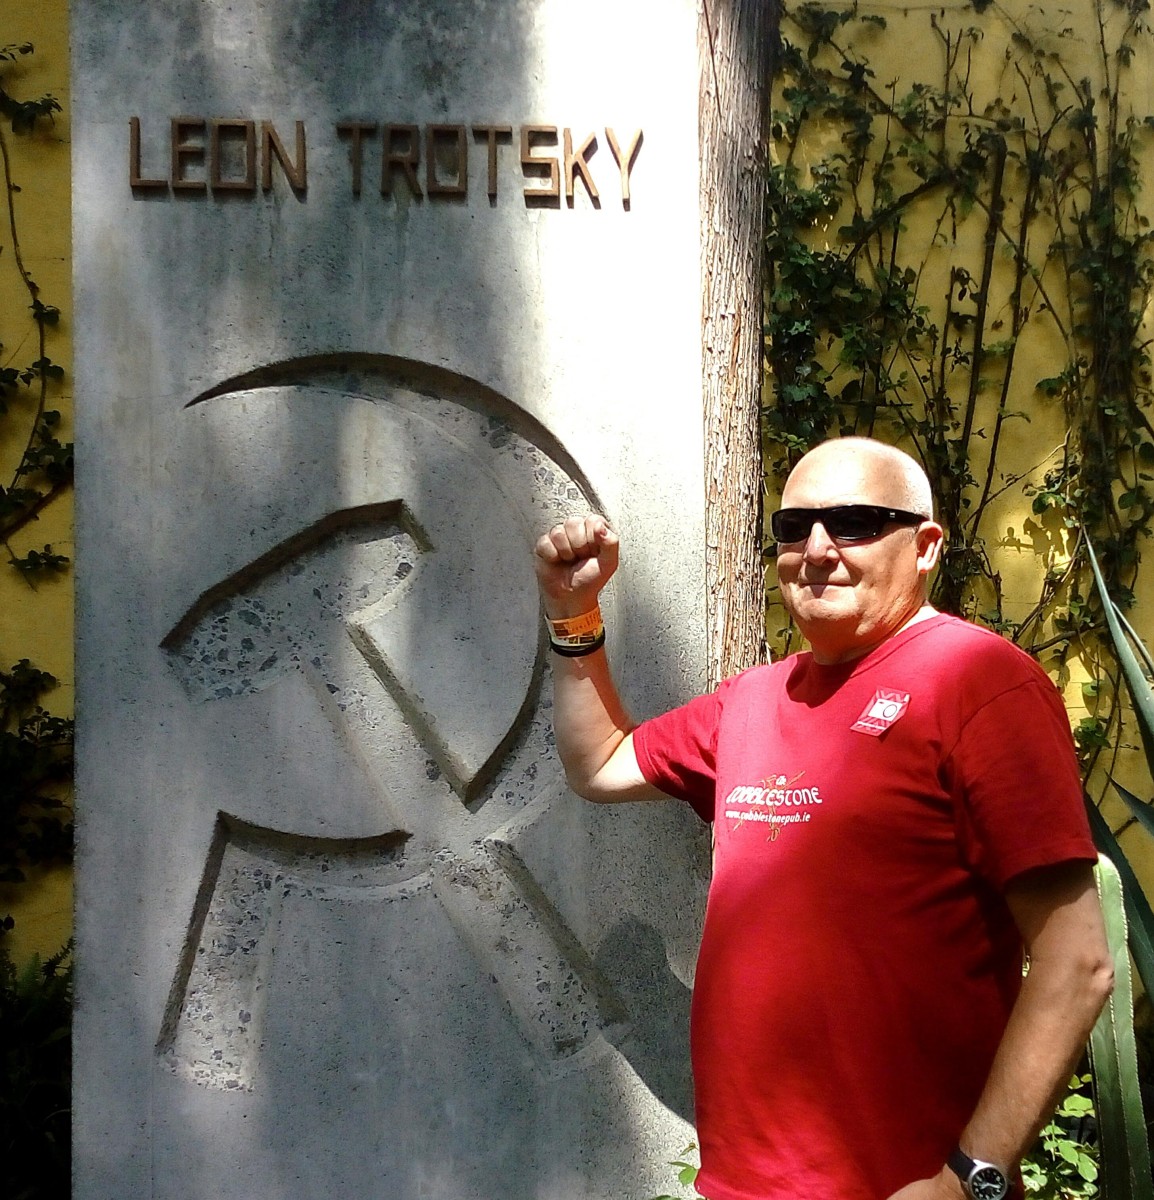 Vincent Doherty in Coyoacán, Mexico, where Trotsky was assassinated. (Image reproduced with kind permission of Vincent Doherty).